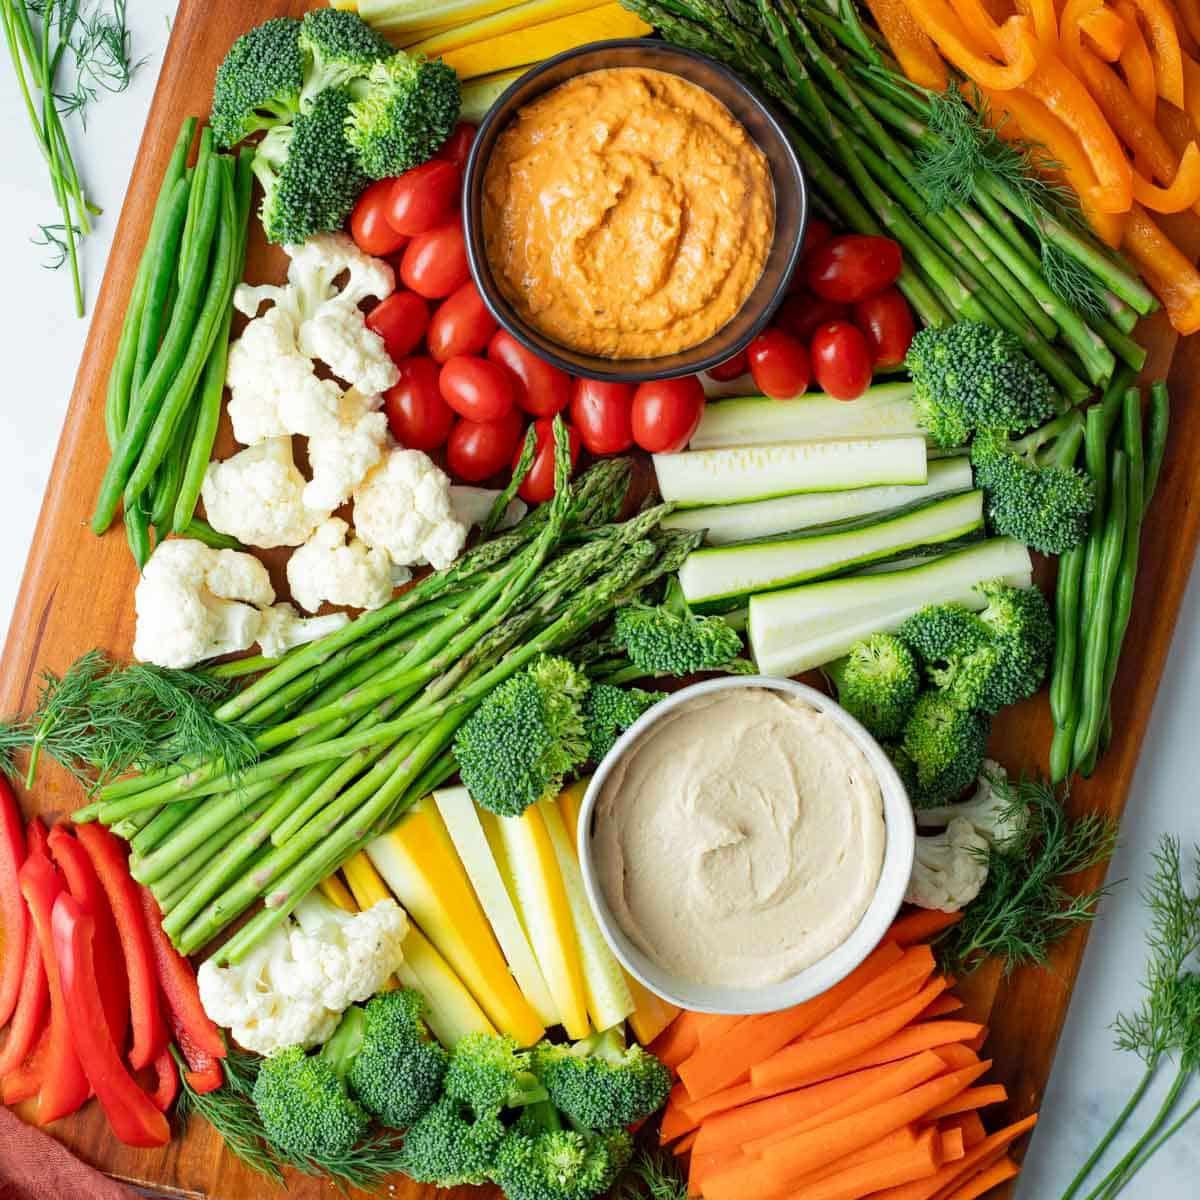 Veggie tray with assorted vegetables and dips.
